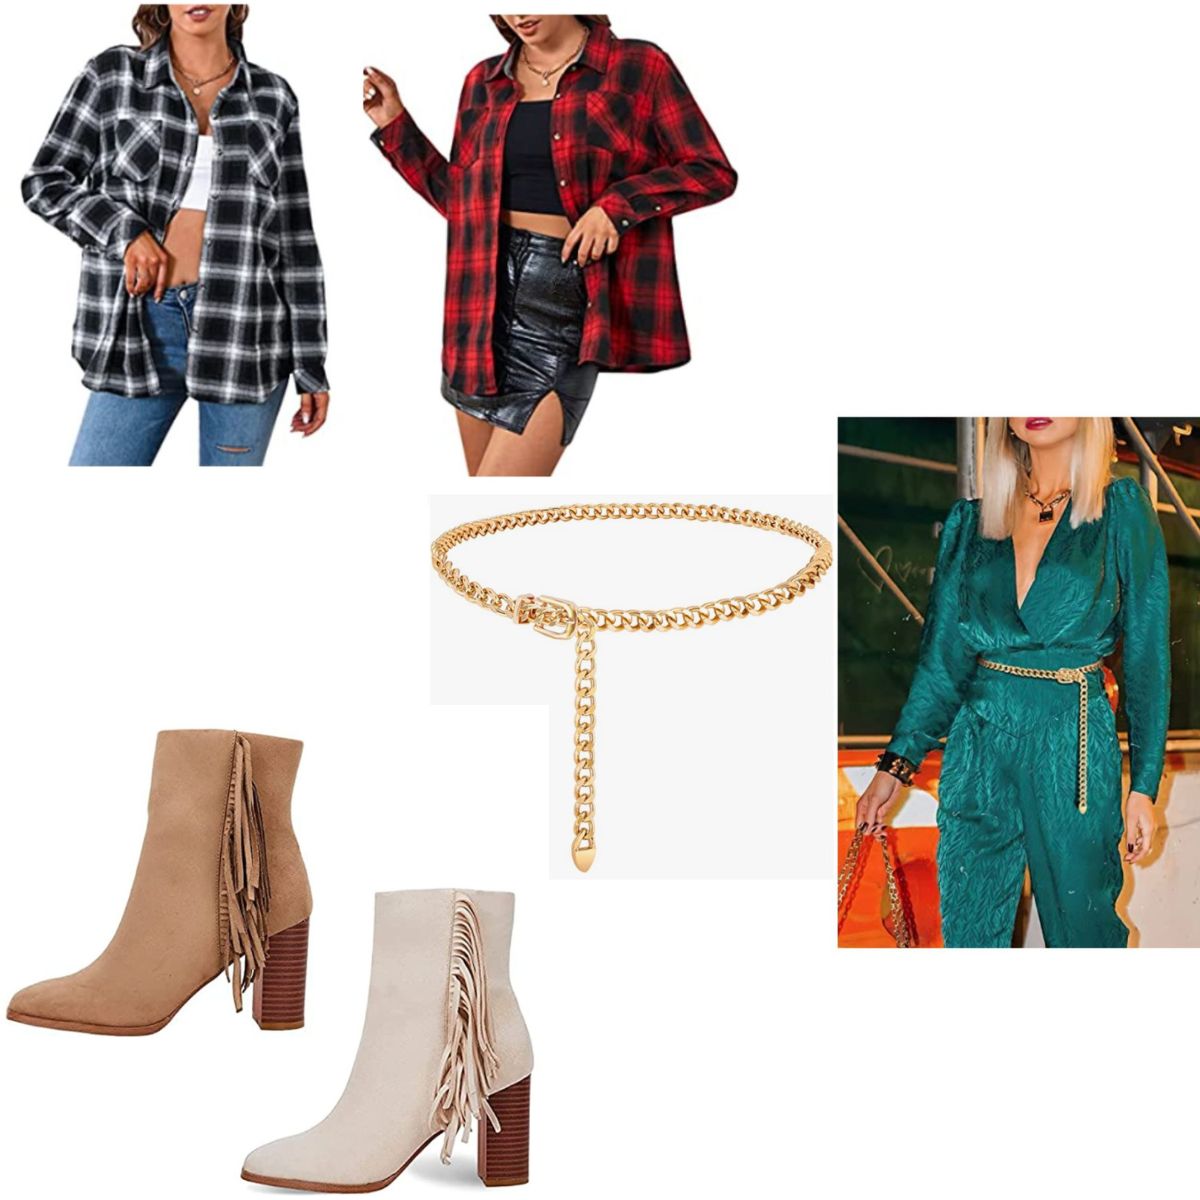 Amazing deals on women's apparel, ankle booties and chain belts